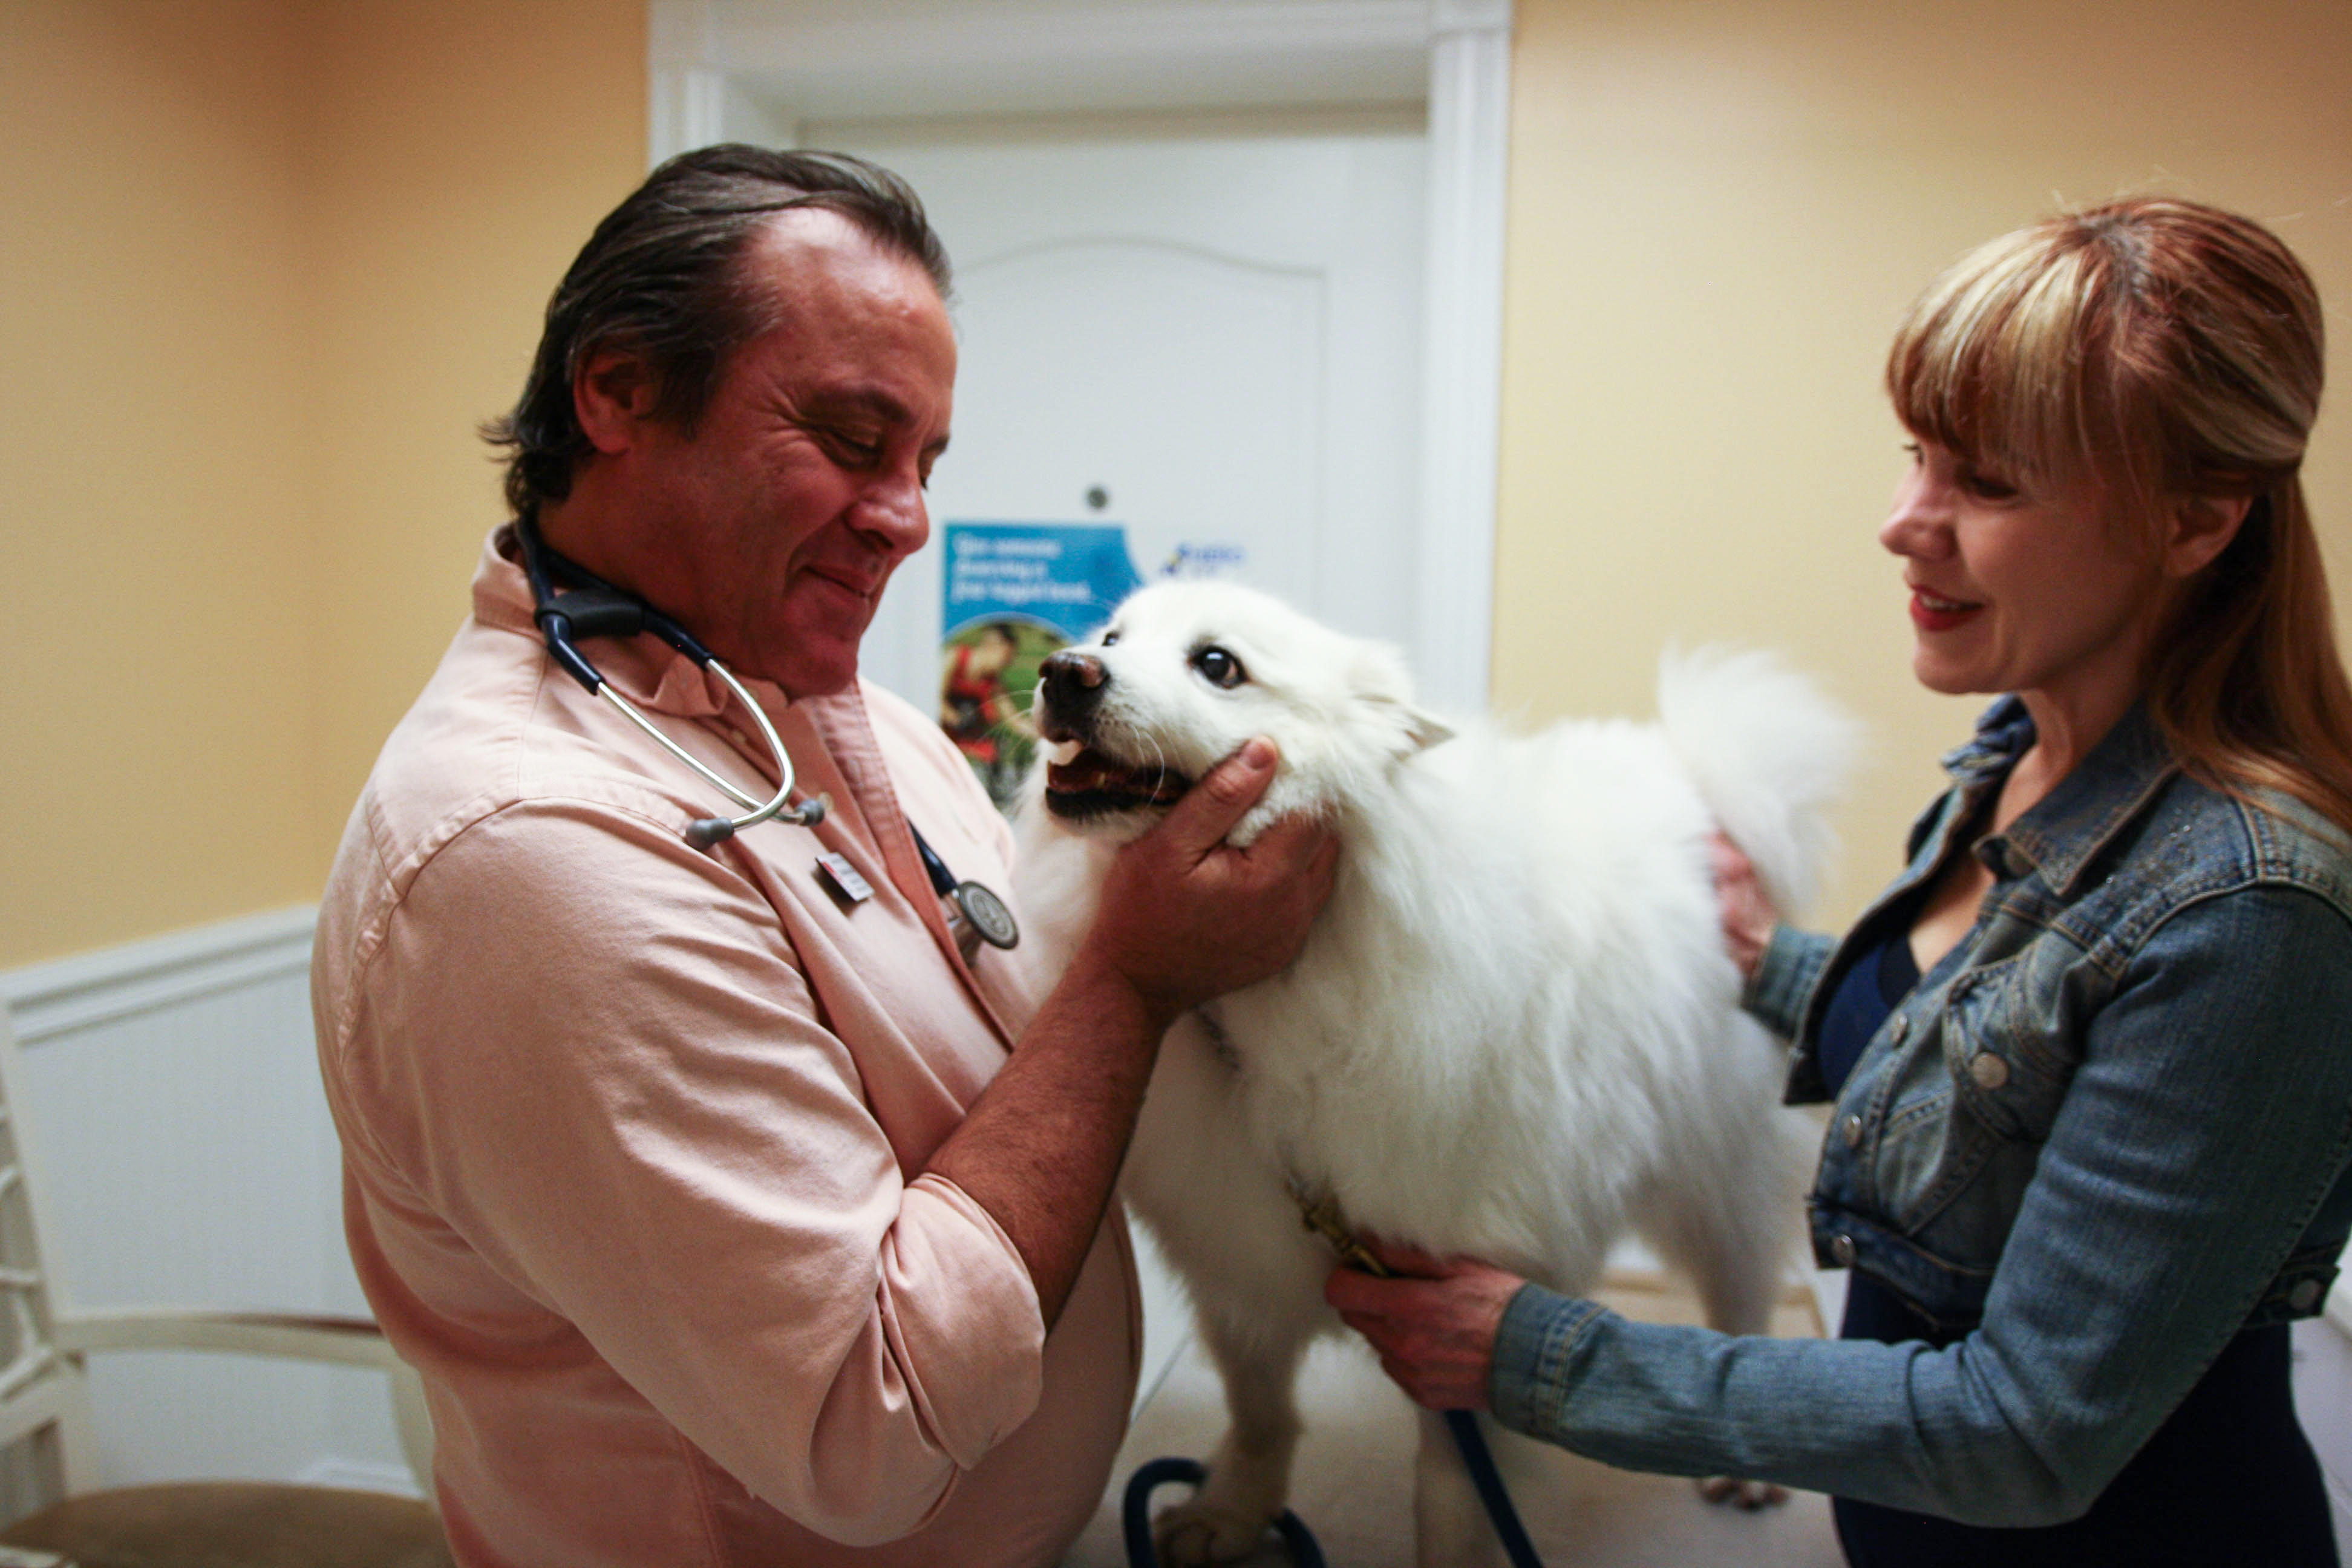 Dr. Anthony Krawitz greets a happy patient before beginning an annual wellness exam.